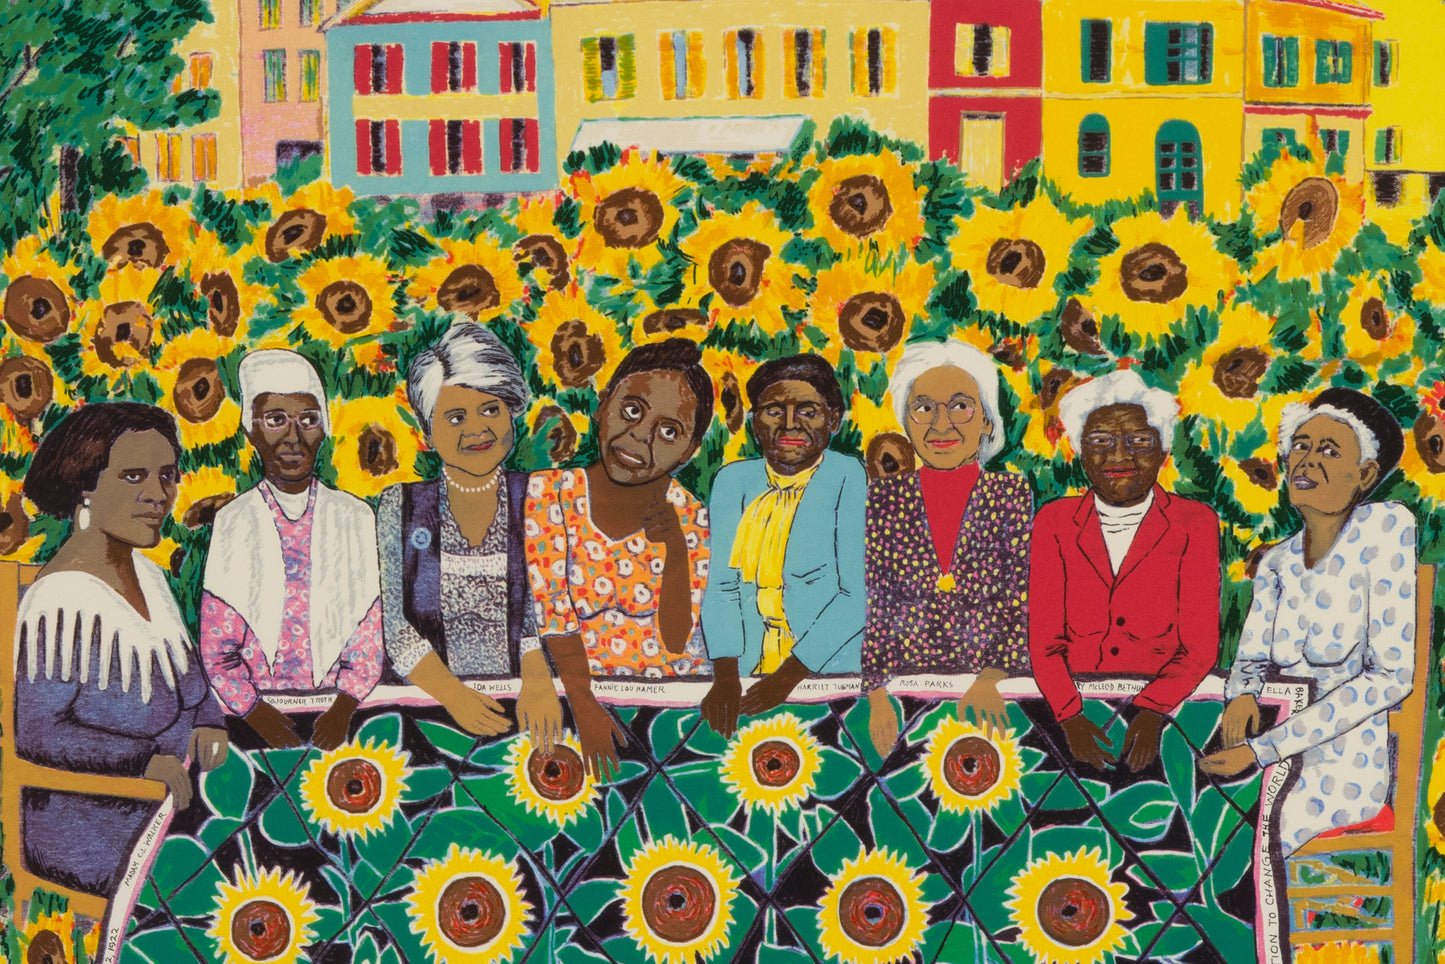 FAITH RINGGOLD 'The Sunflower Quilting Bee at Arles' (1997)